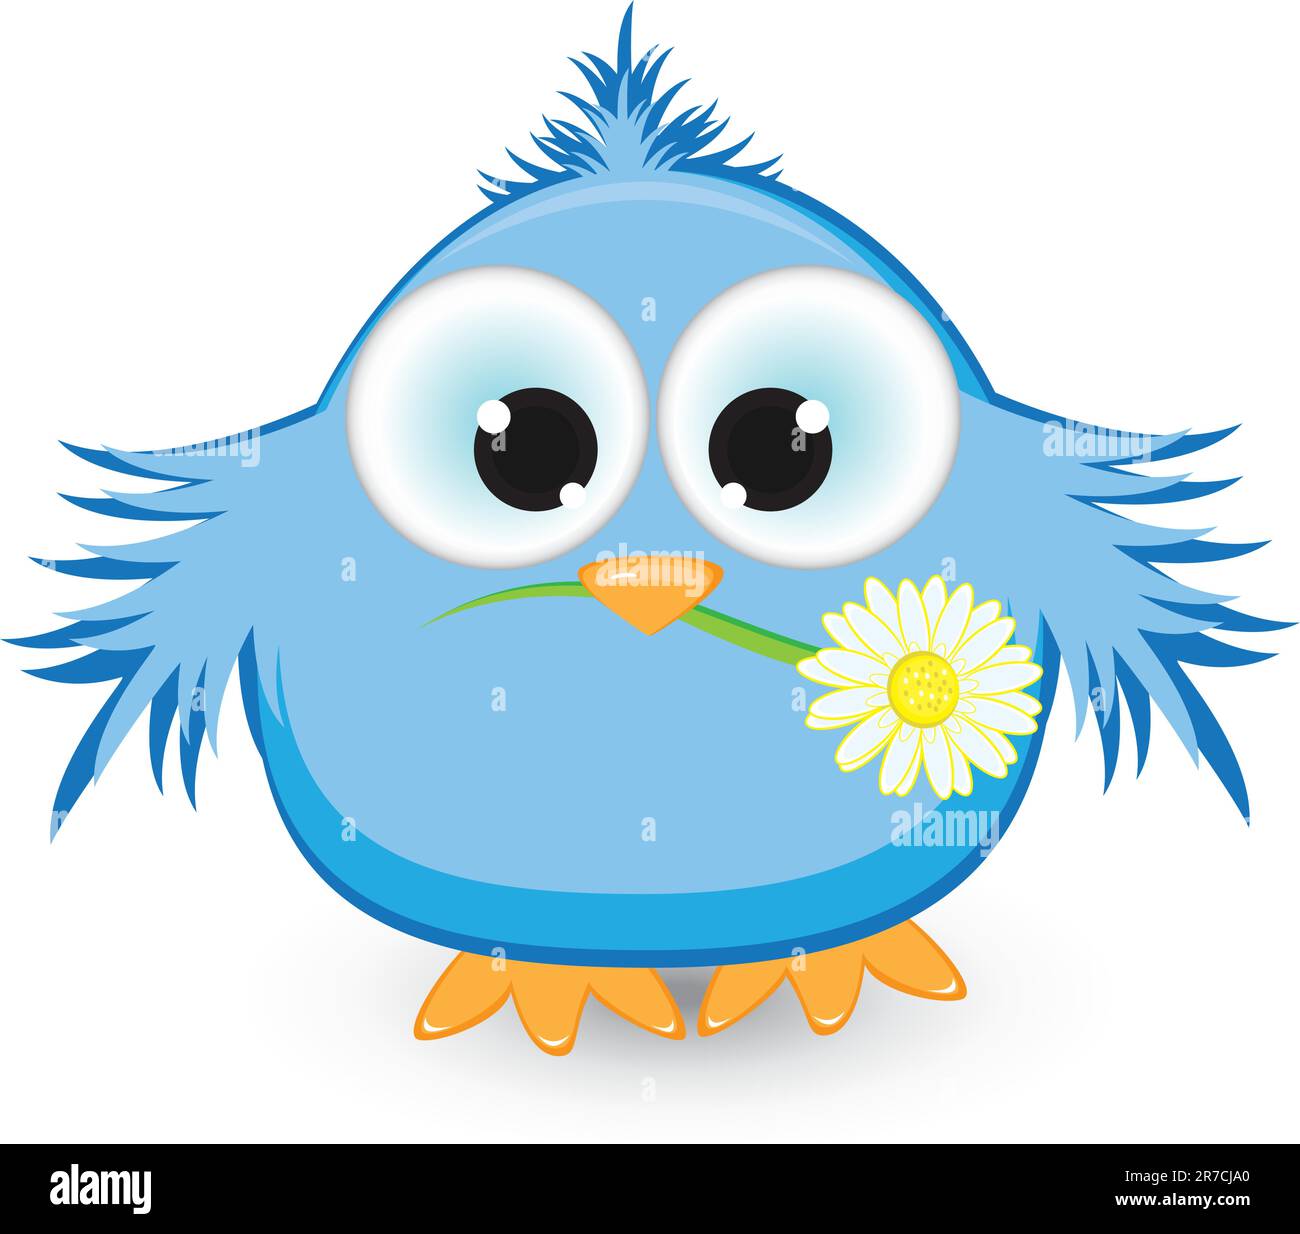 Blue sparrow with a flower in its beak. Illustration on white background Stock Vector